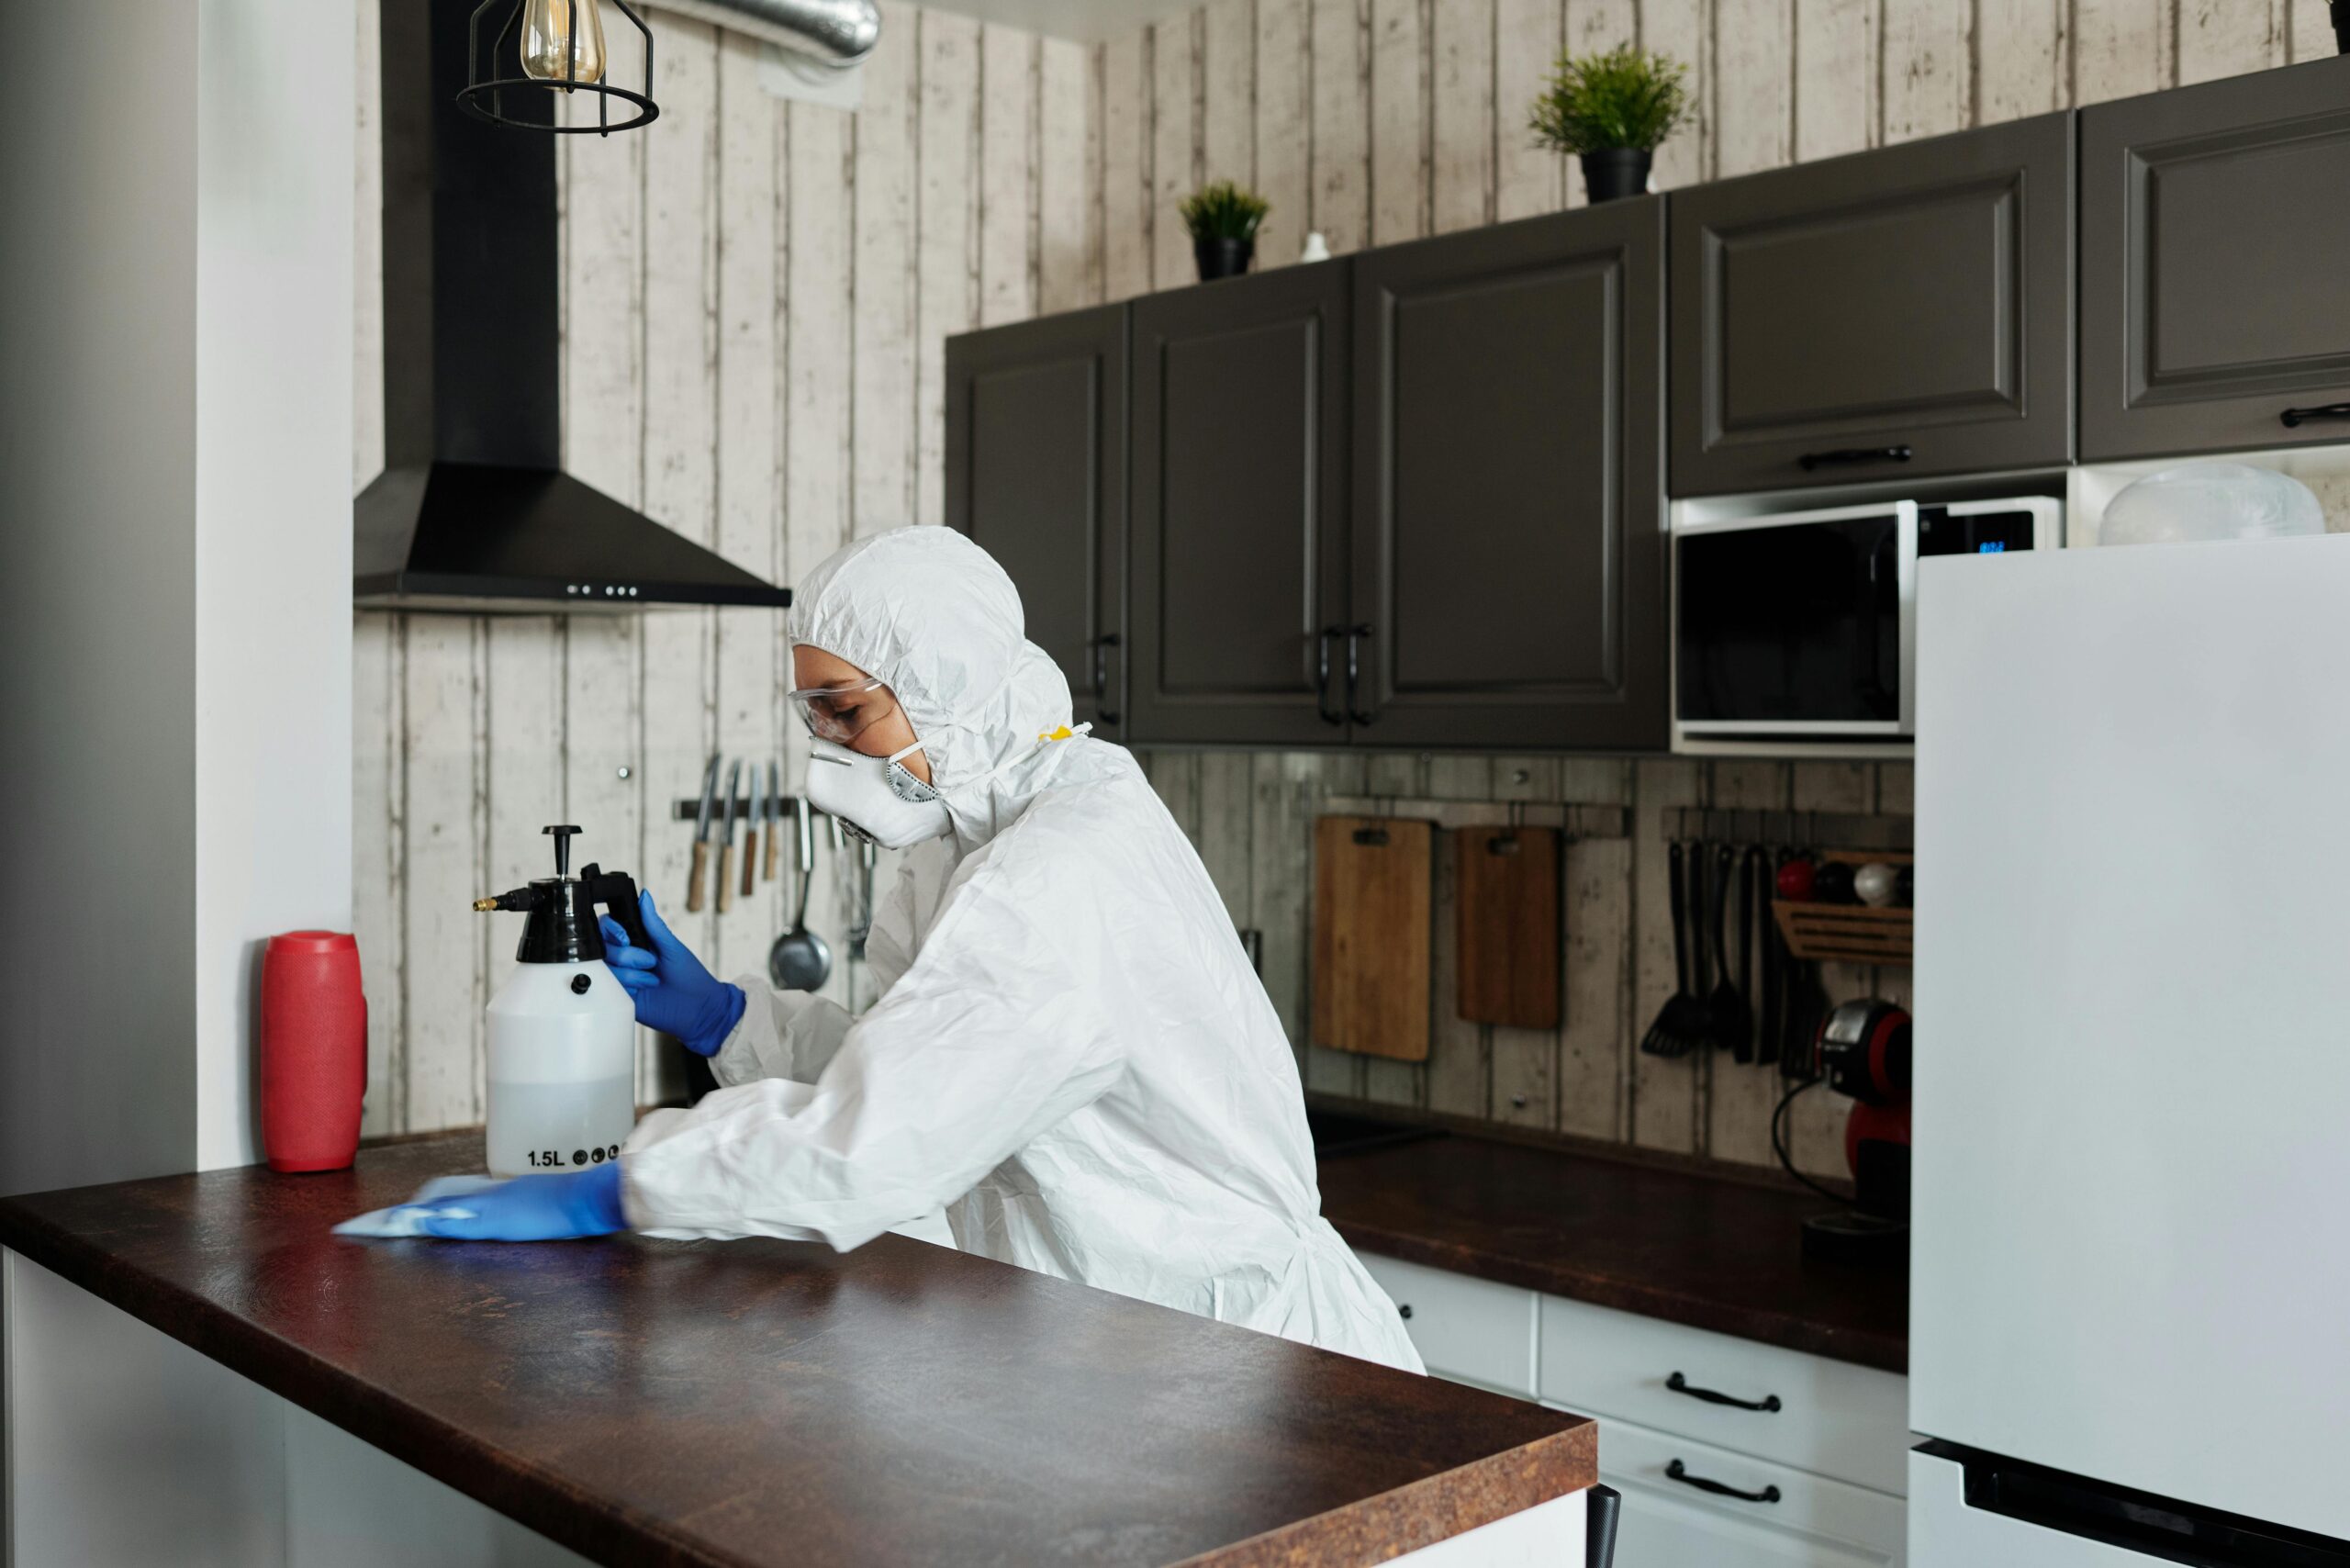 Mold removal services is important when relocating